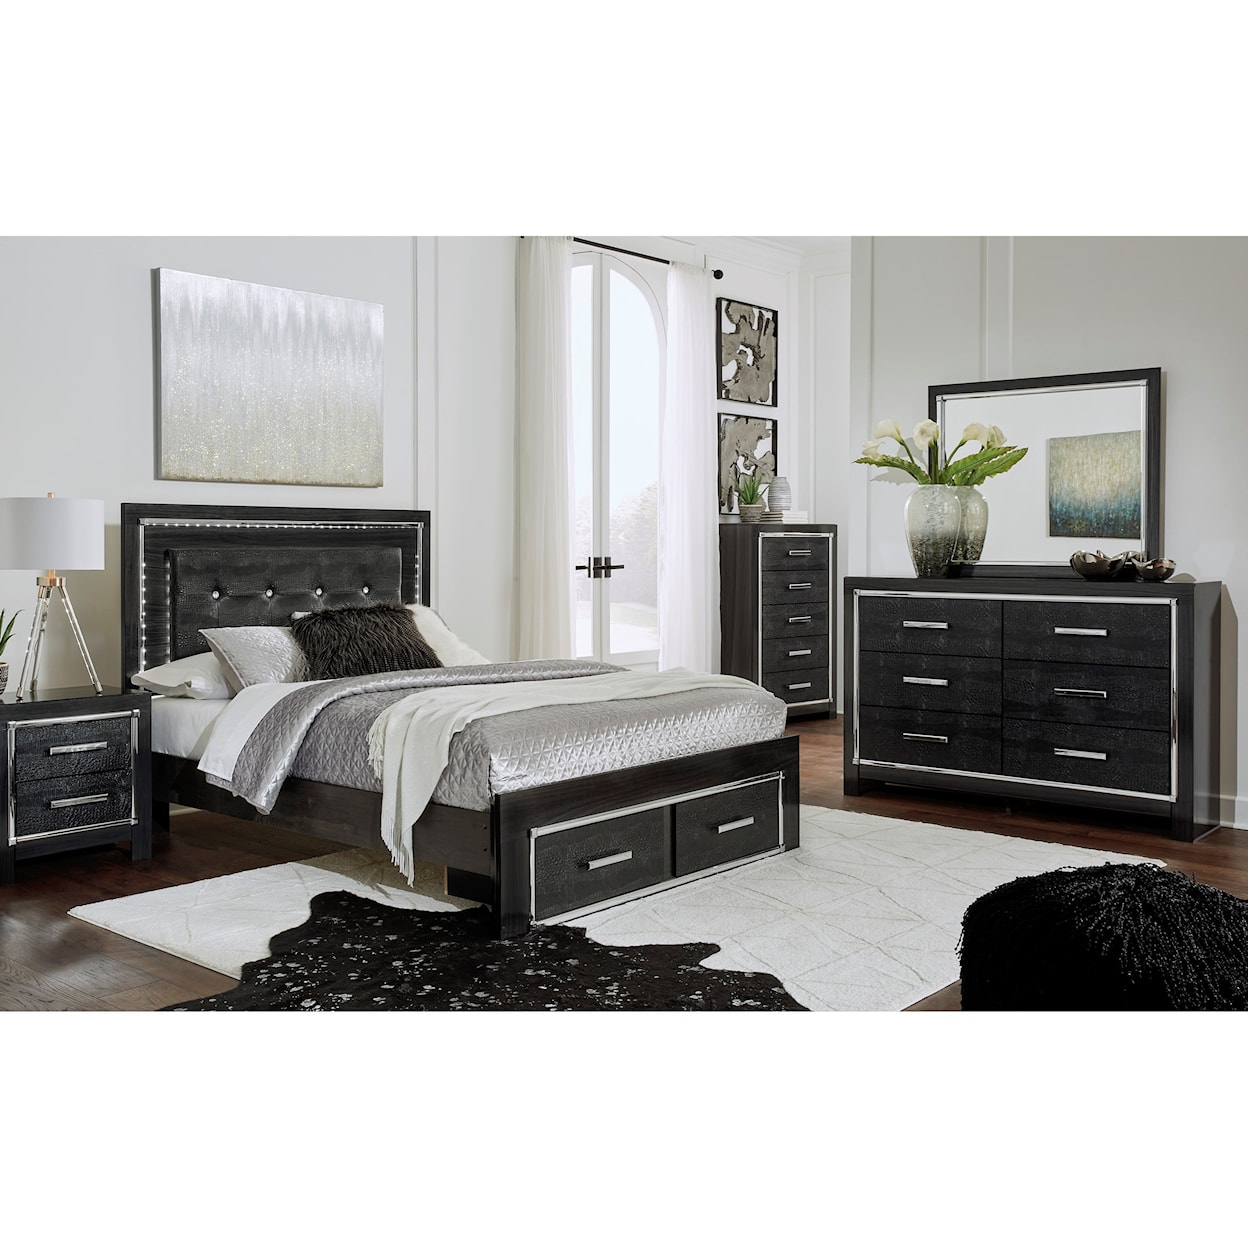 Michael Alan Select Kaydell Queen Uph Storage Bed with LED Lighting